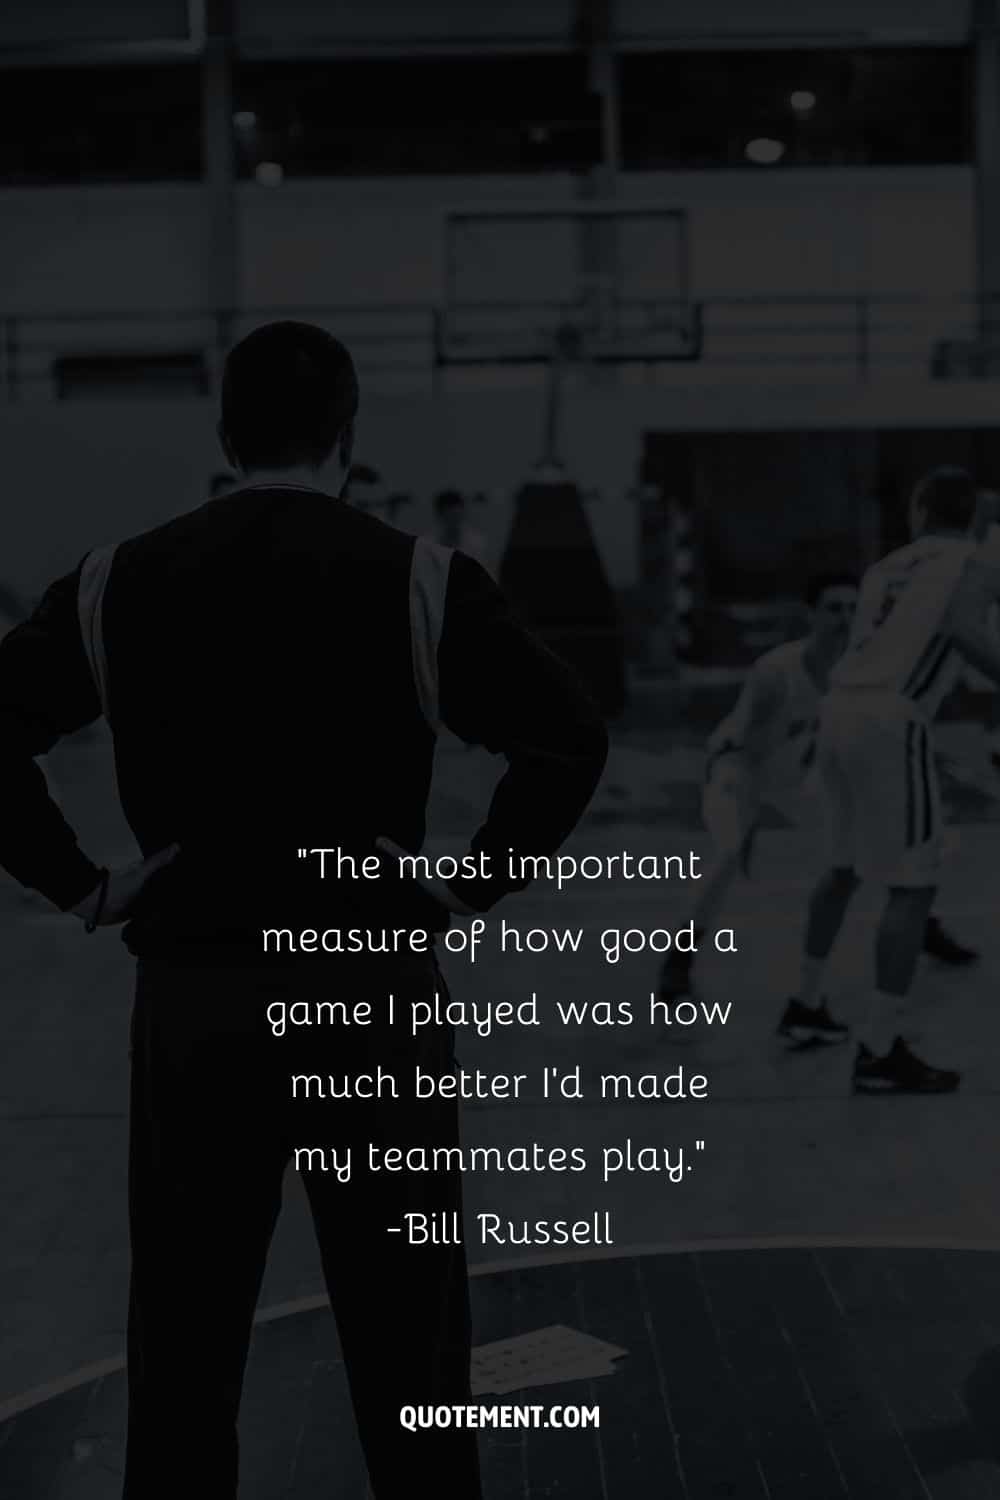 The most important measure of how good a game I played was how much better I'd made my teammates play